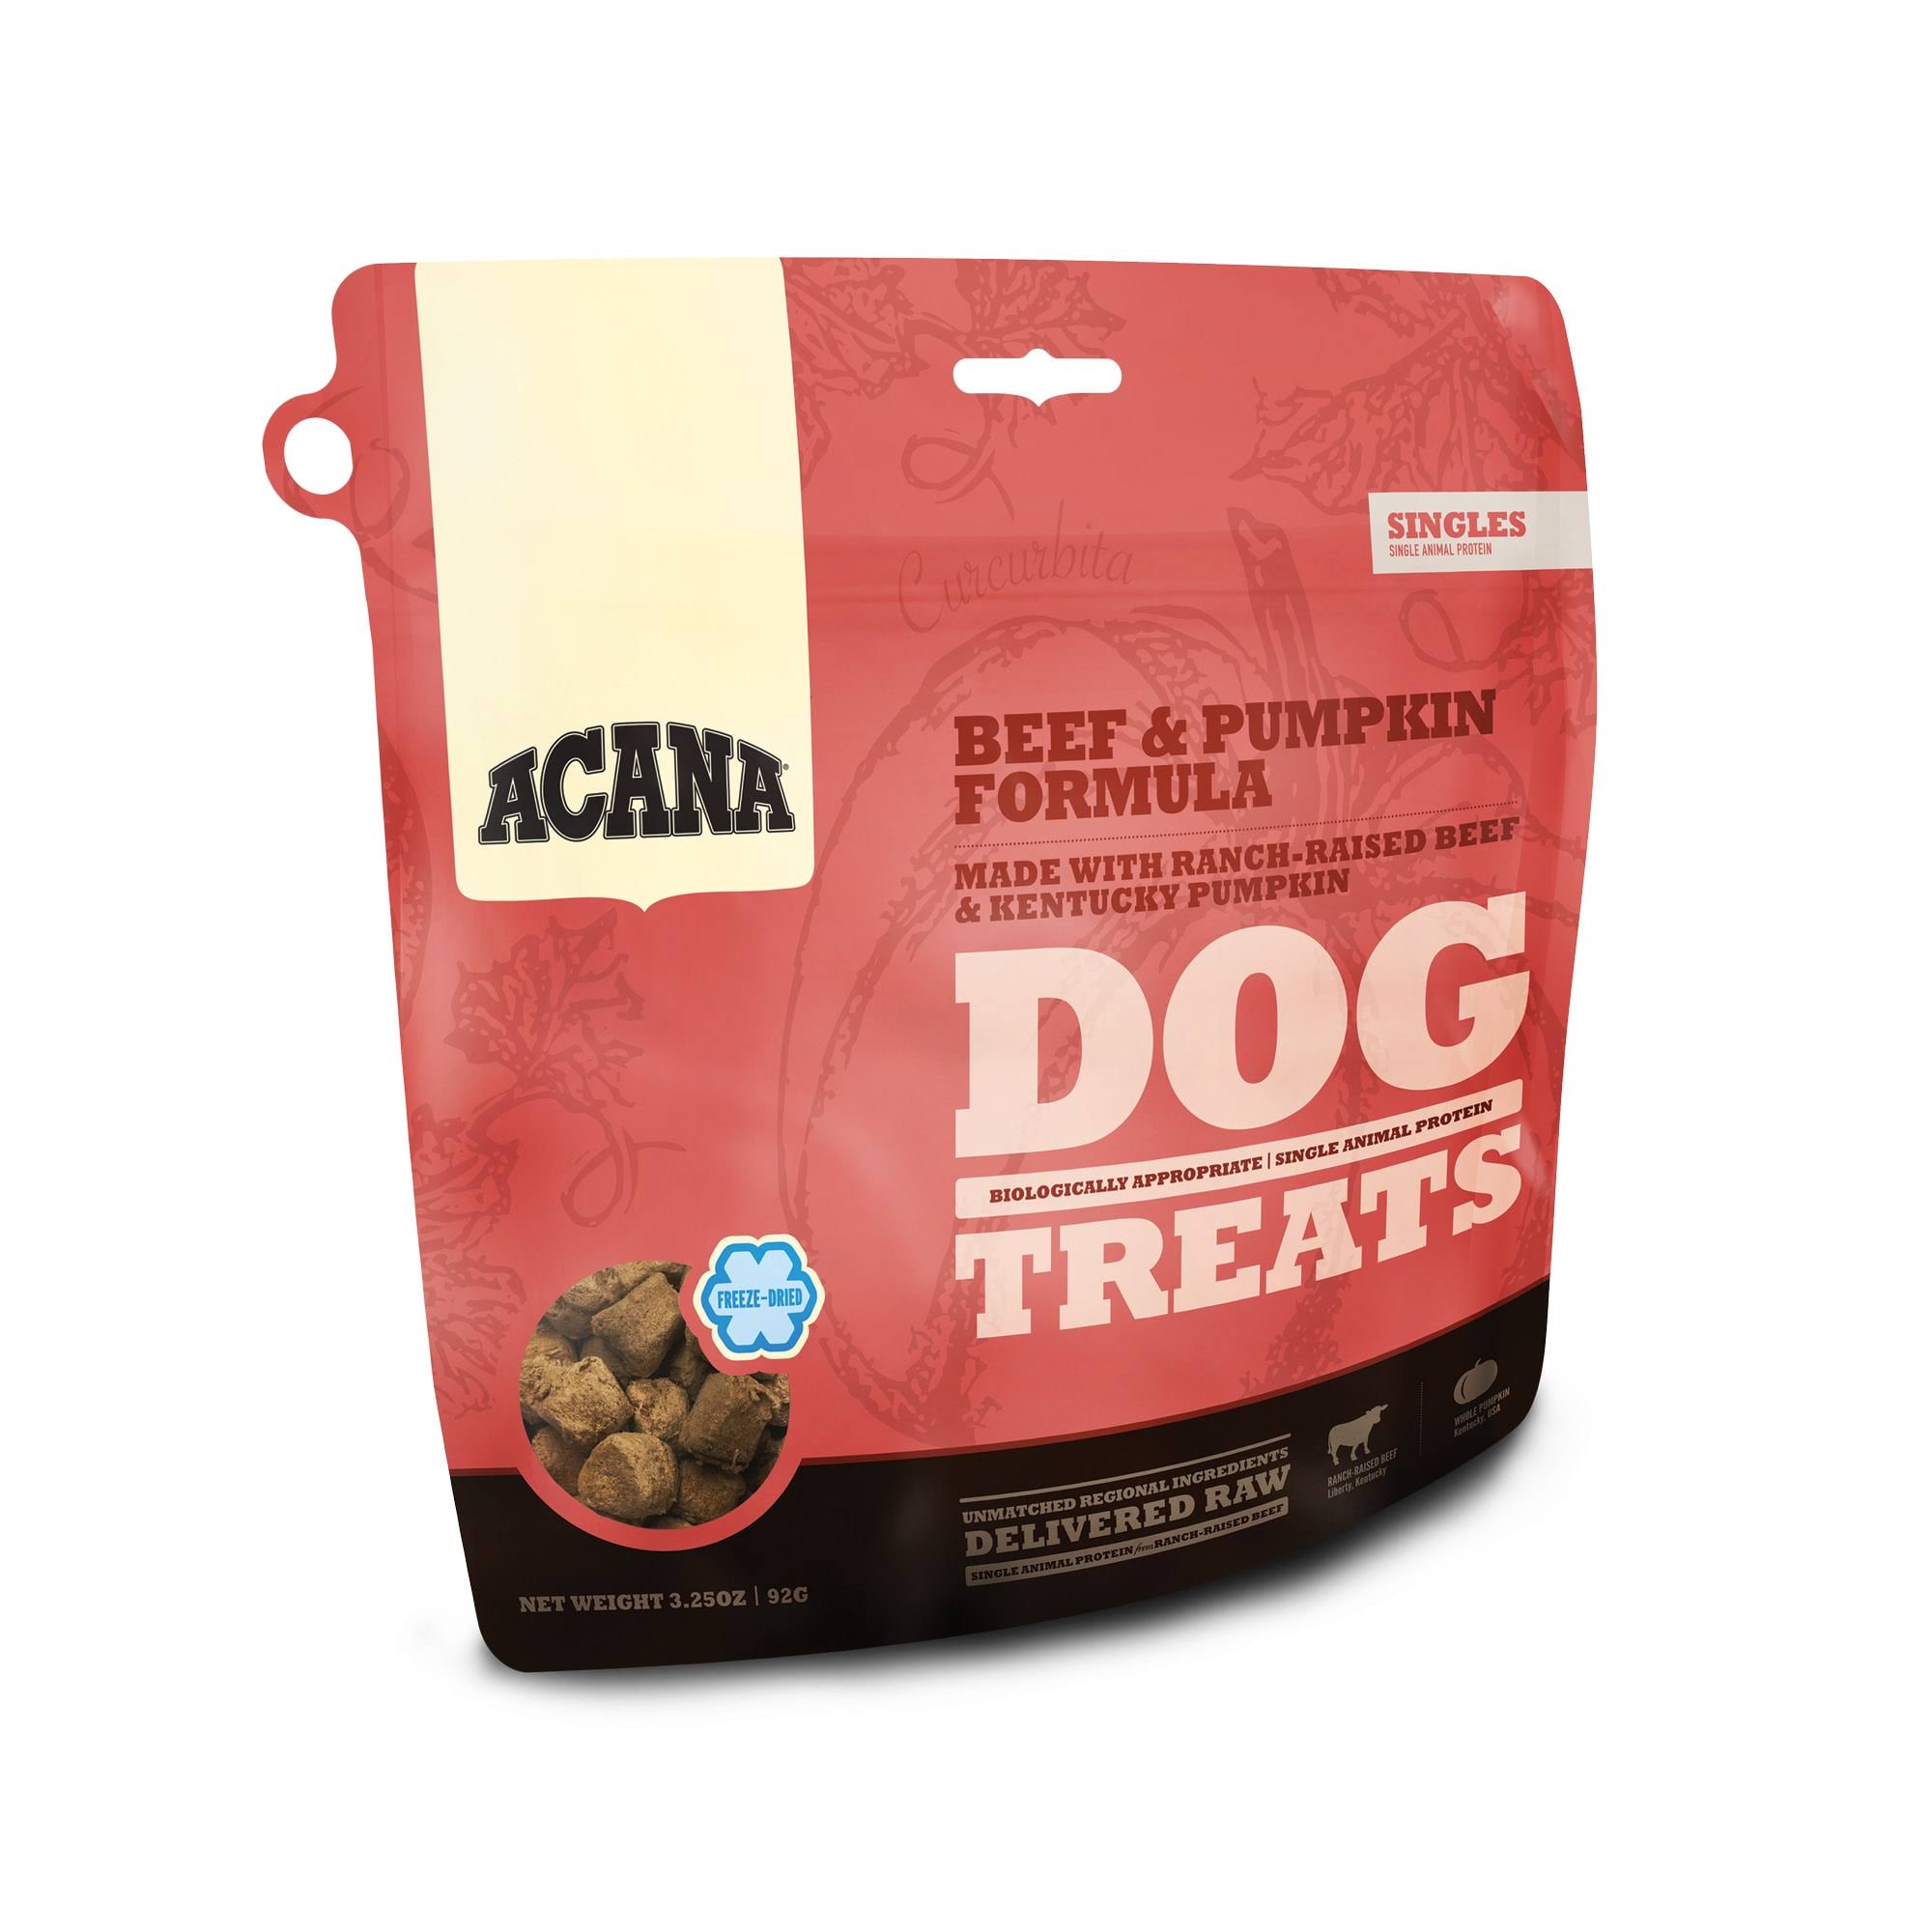 ACANA 3 Pack of Beef and Pumpkin Dog Treats, 3.25 Ounces Each, Freeze-Dried Raw Single-Source Protein